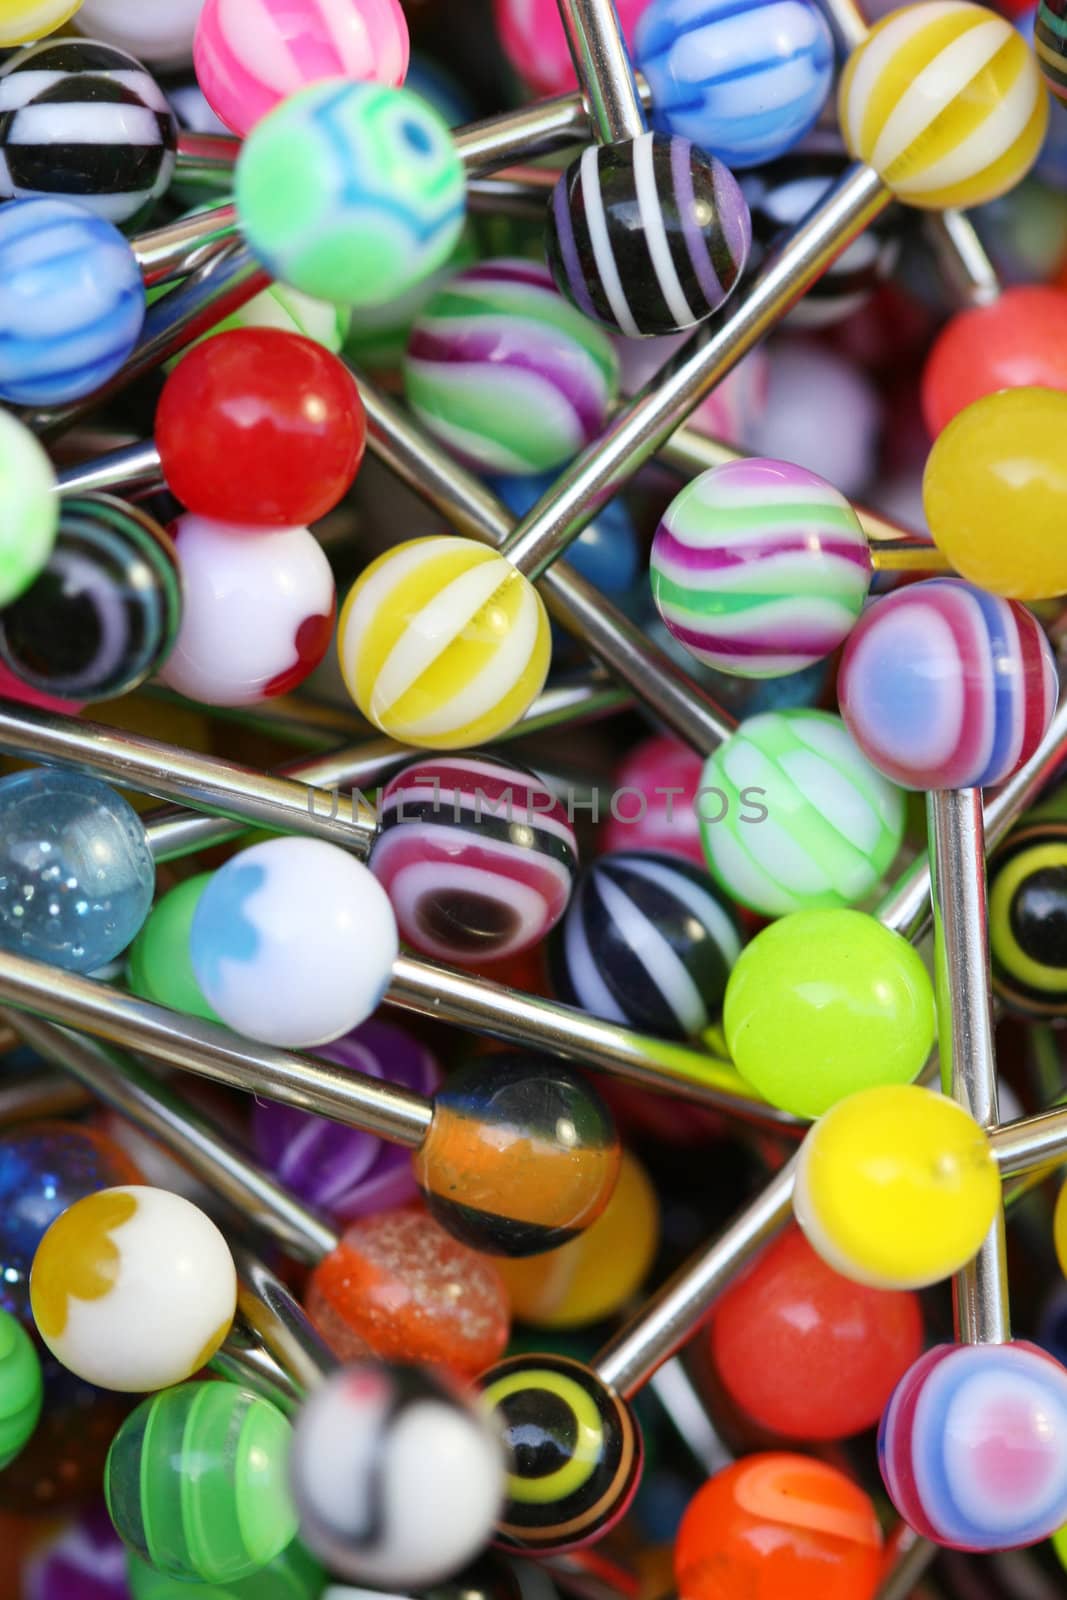 A giant pile of colorful tongue rings.